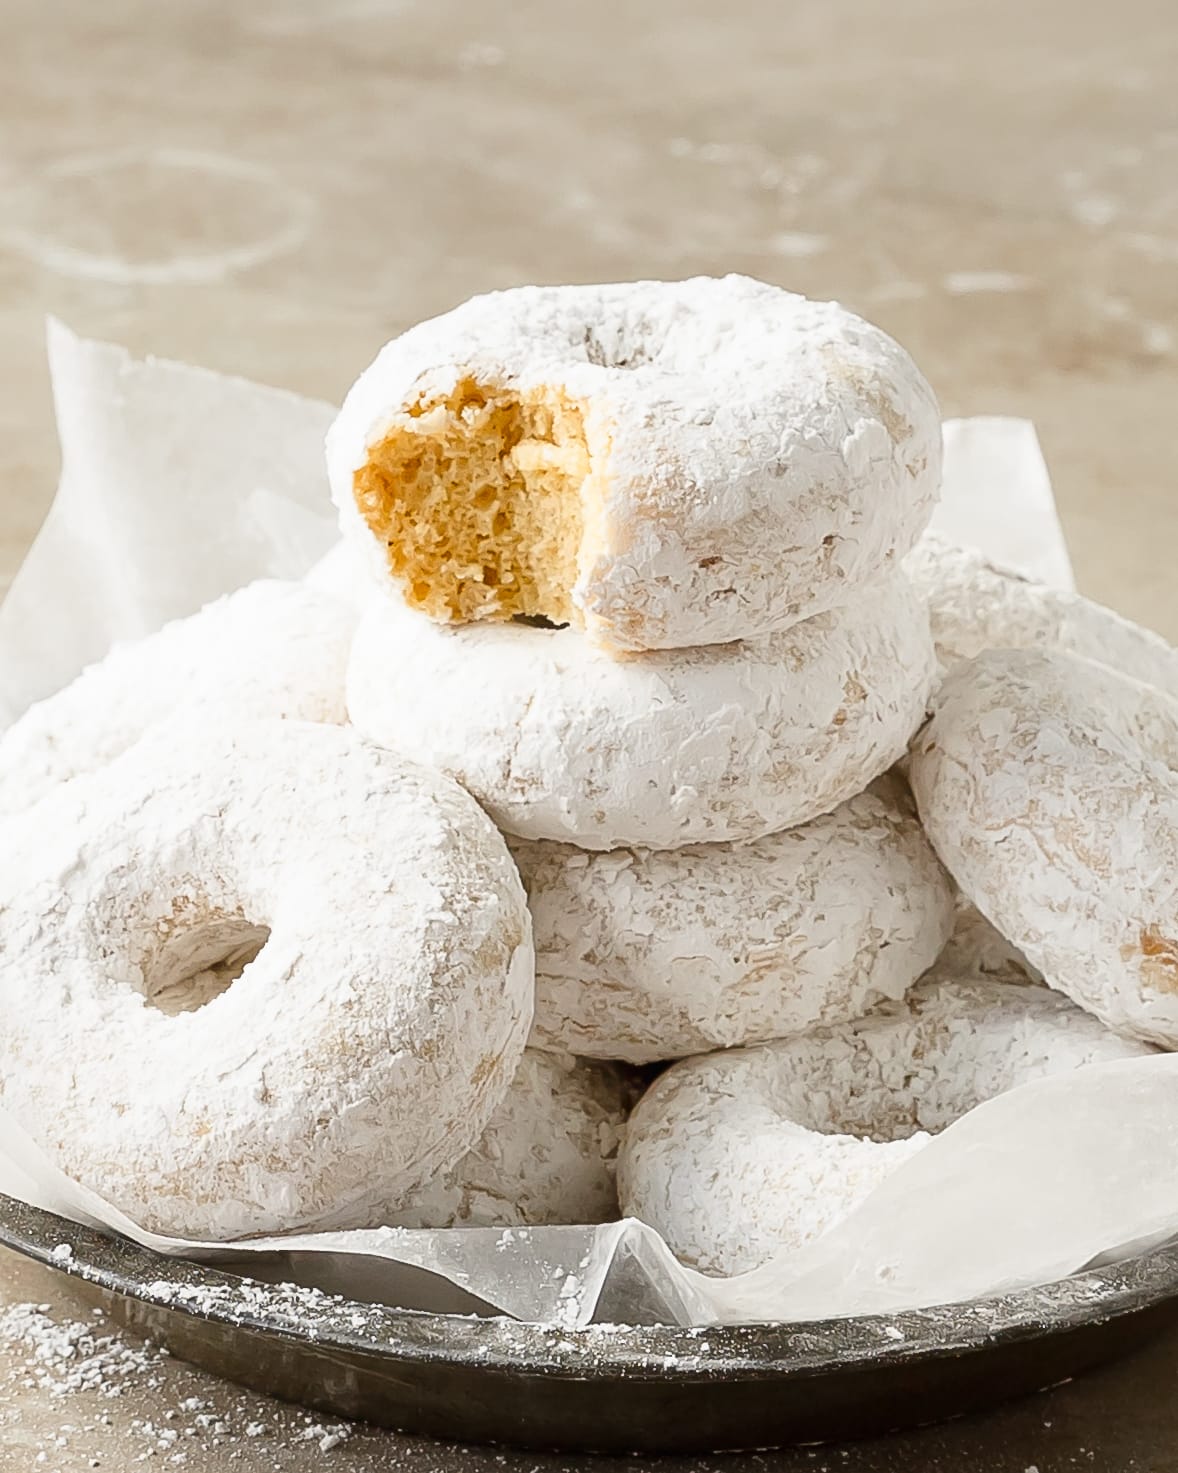 Powdered sugar donuts are soft, moist and fluffy, lightly spiced baked donuts coated in powdered sugar. These cake-style powdered donuts are quick and easy to make using two bowls, a whisk and a donut pan. If you can make muffins, you can make these cozy powder sugar donuts.